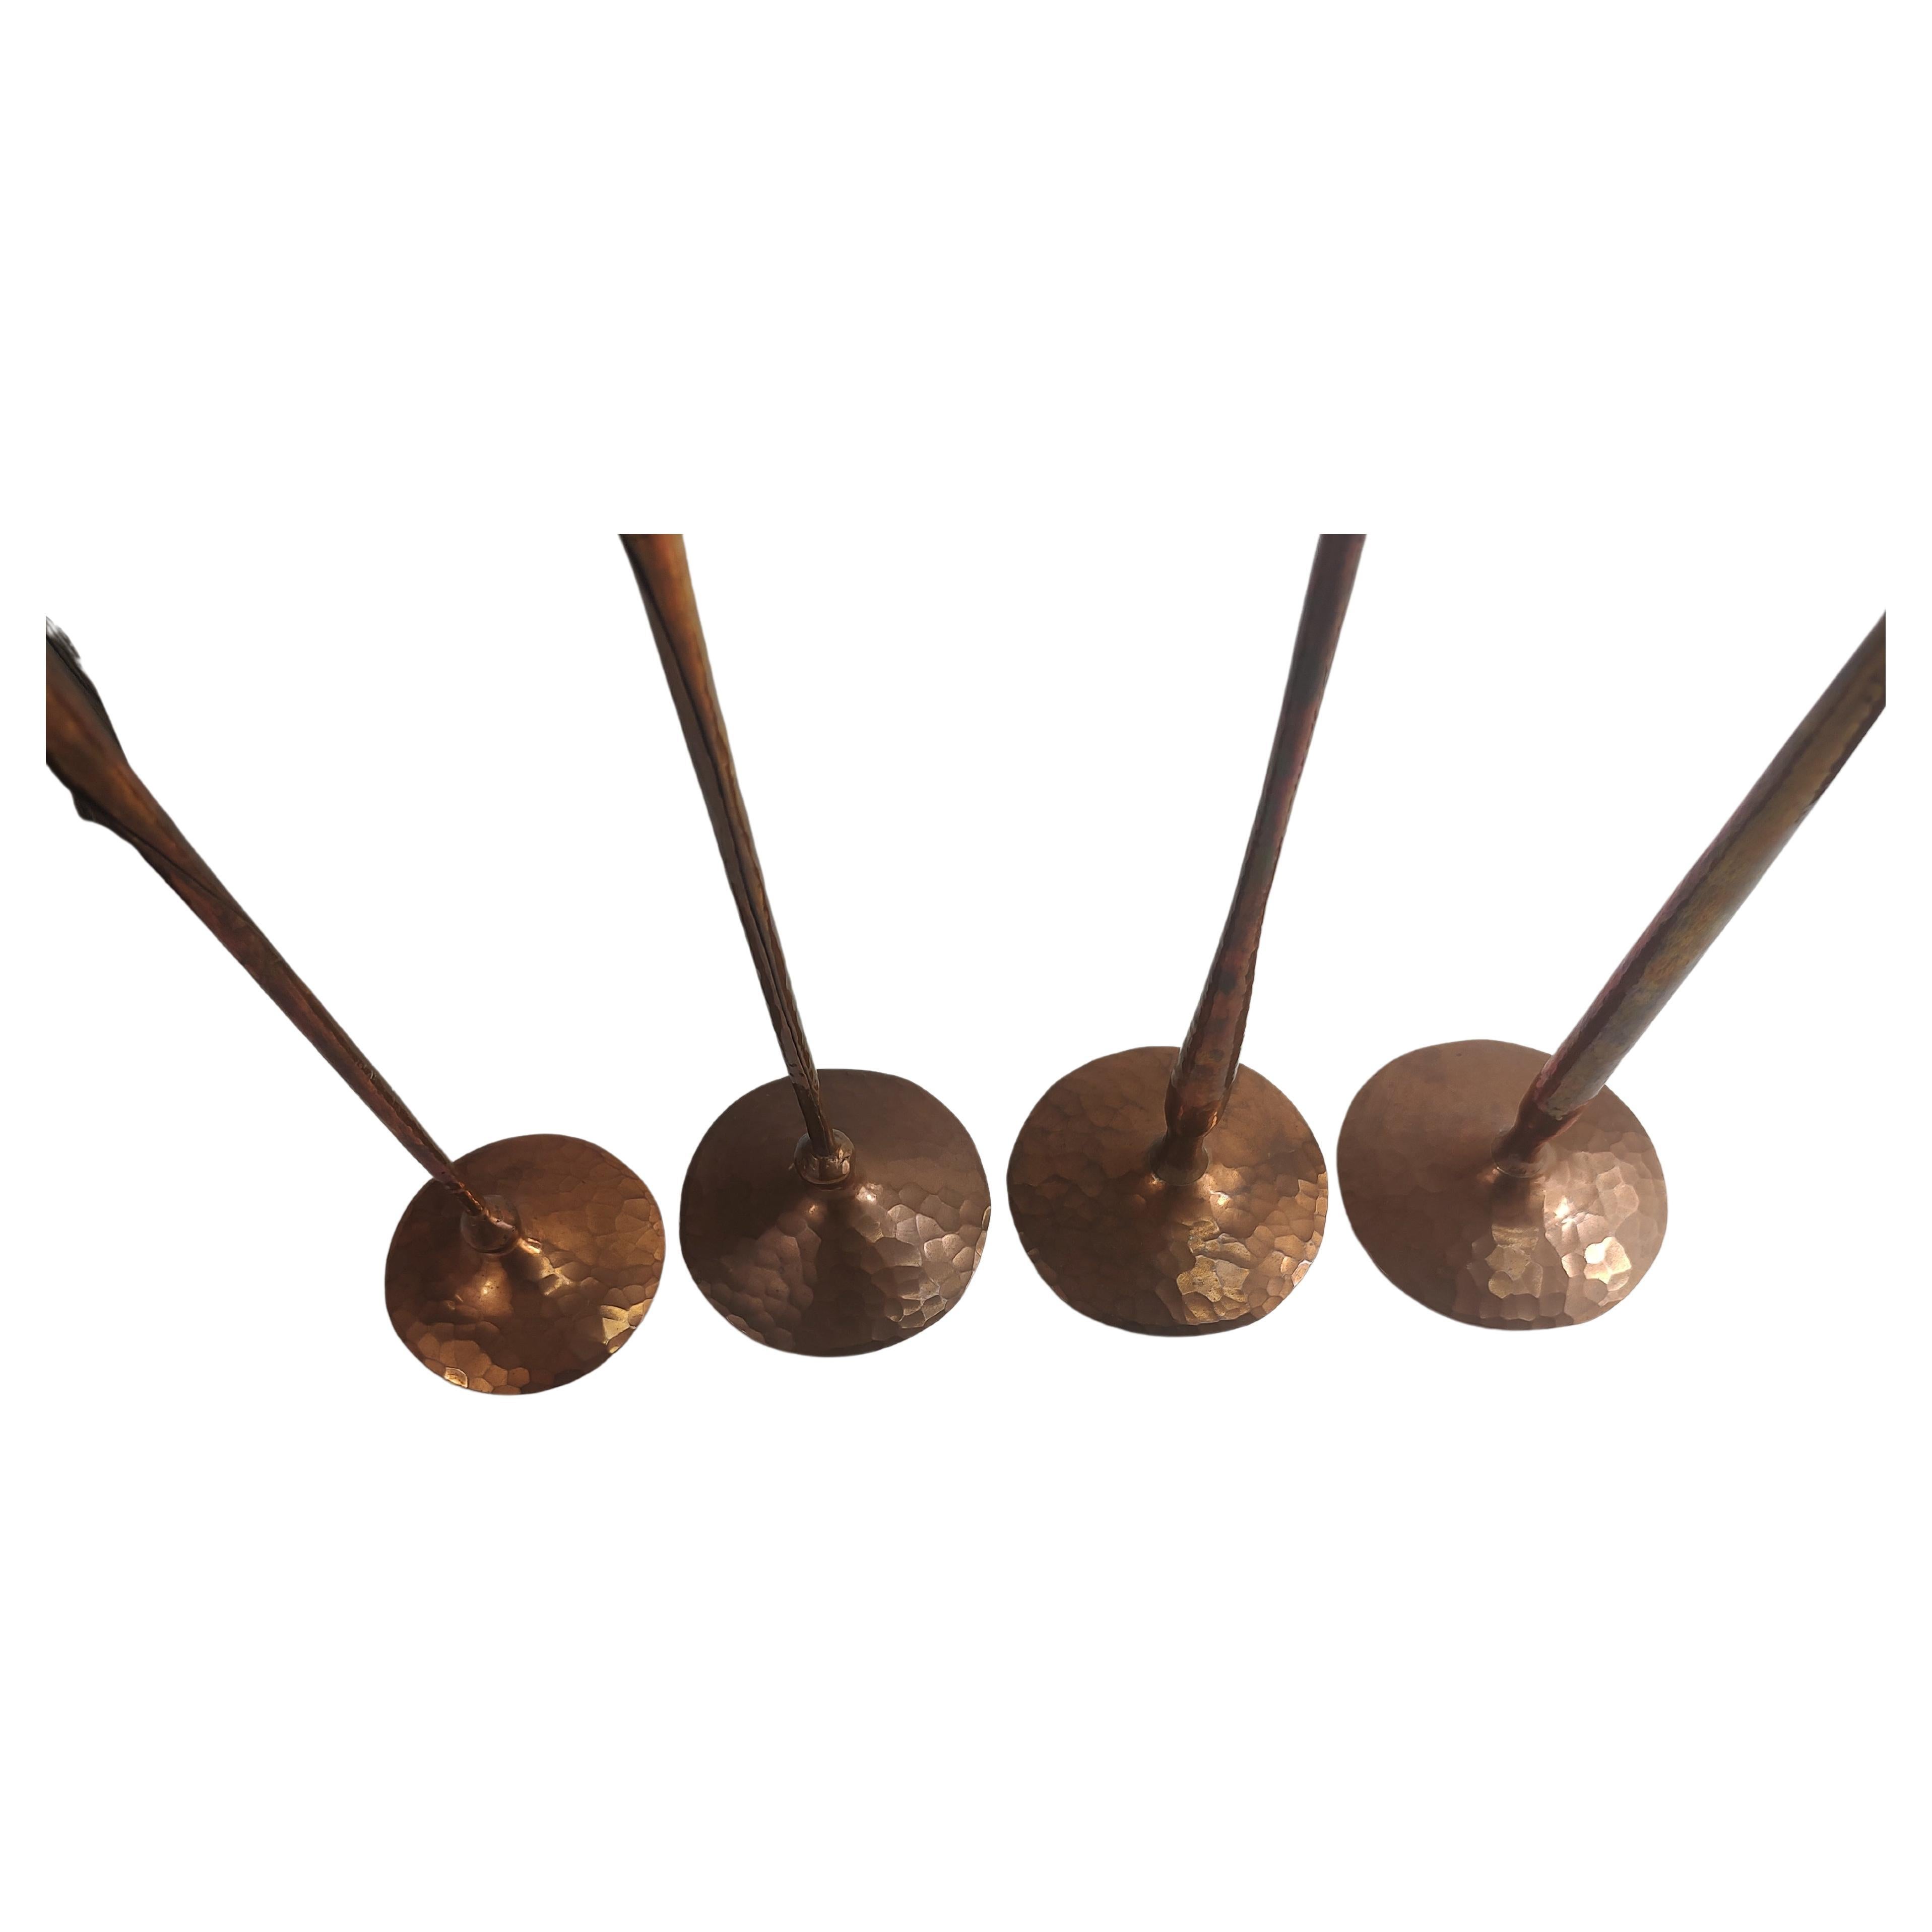 Hand Hammered & Polished Copper Candlesticks by Hessel Studios California  For Sale 1